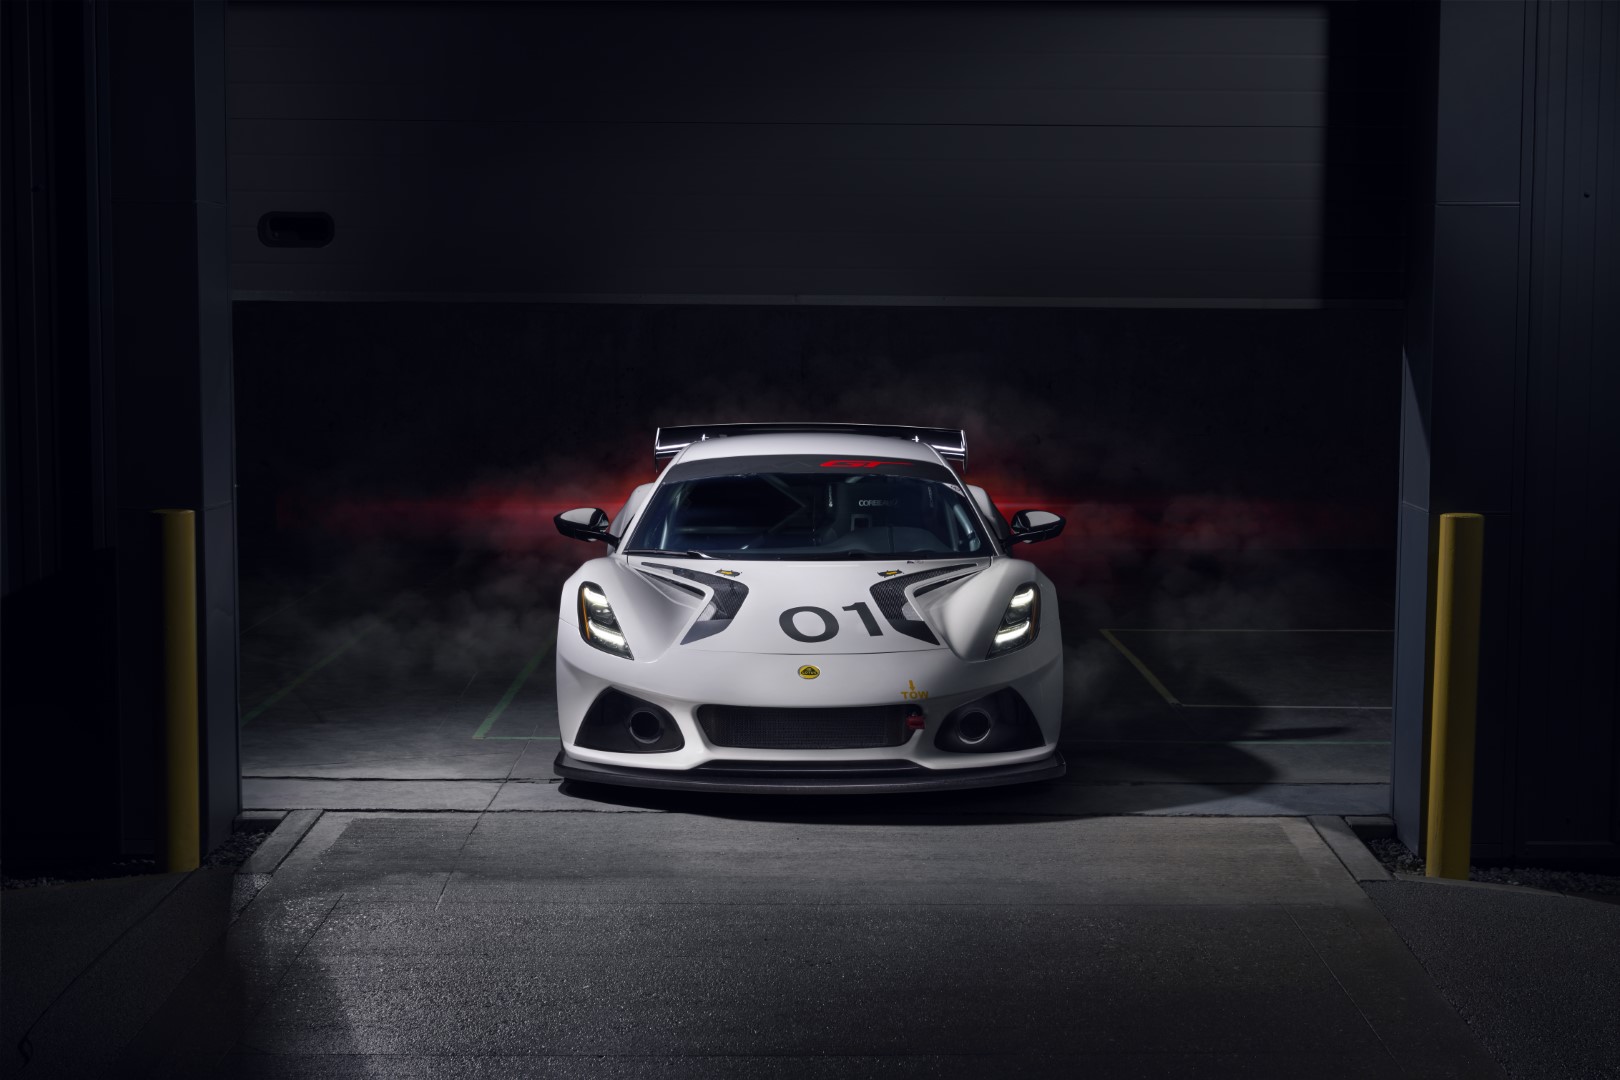 Lotus returns to motor sport with all-new Emira GT4 - Magneto